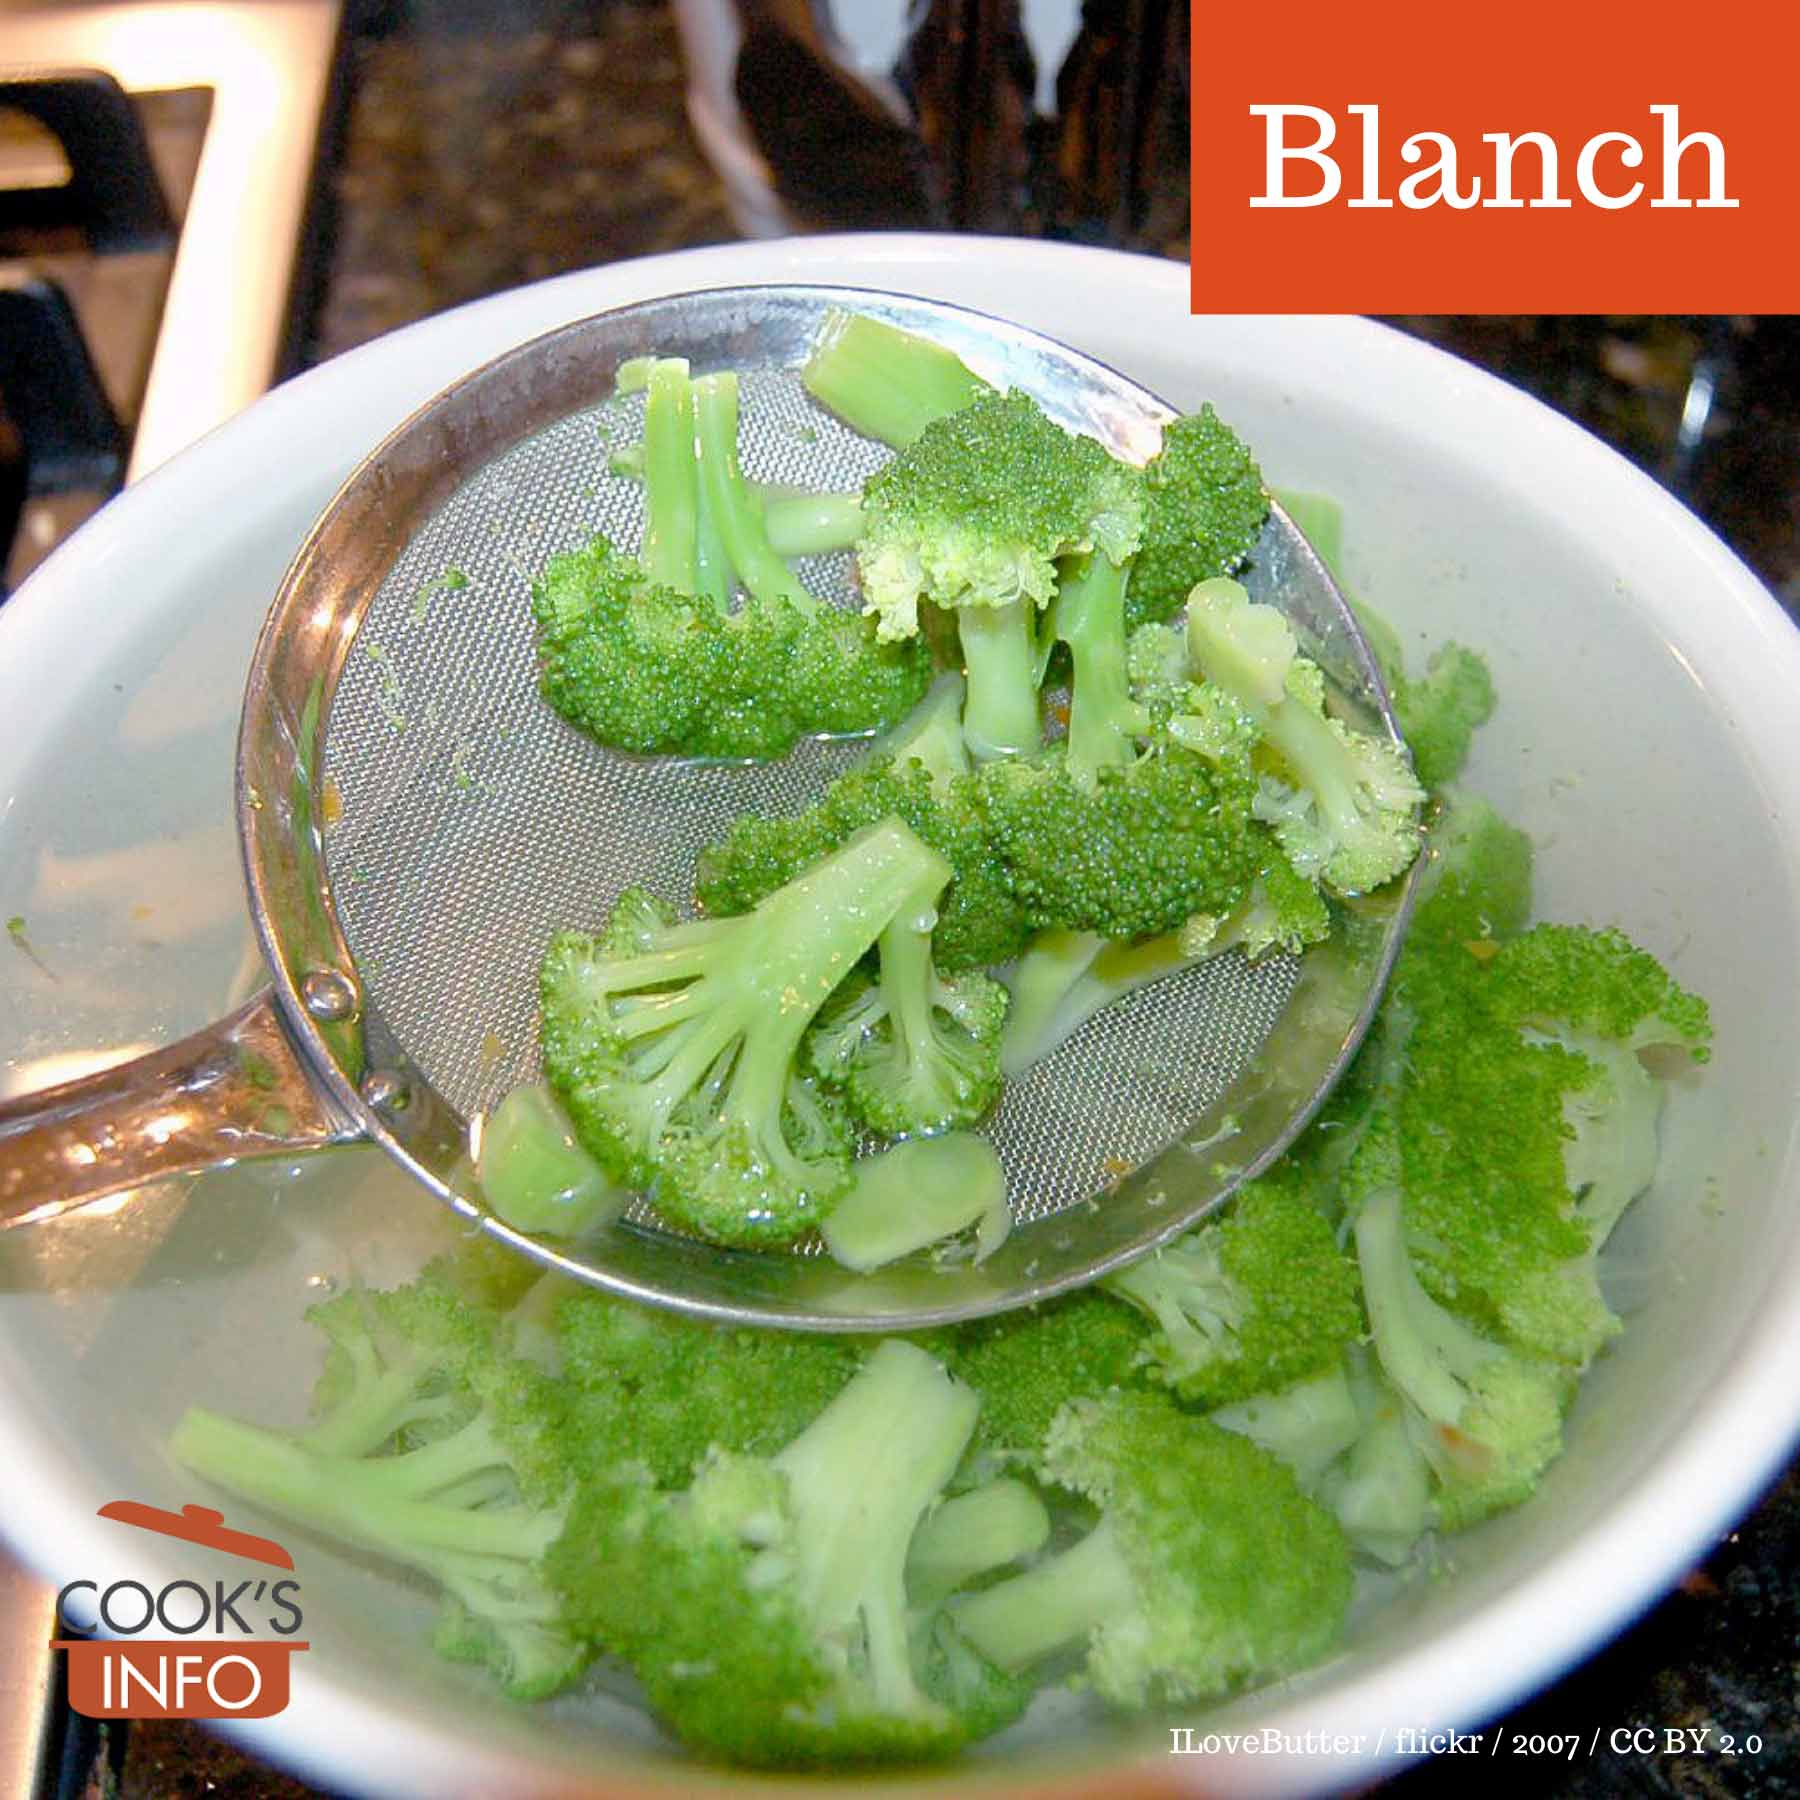 Blanched broccoli in cold water